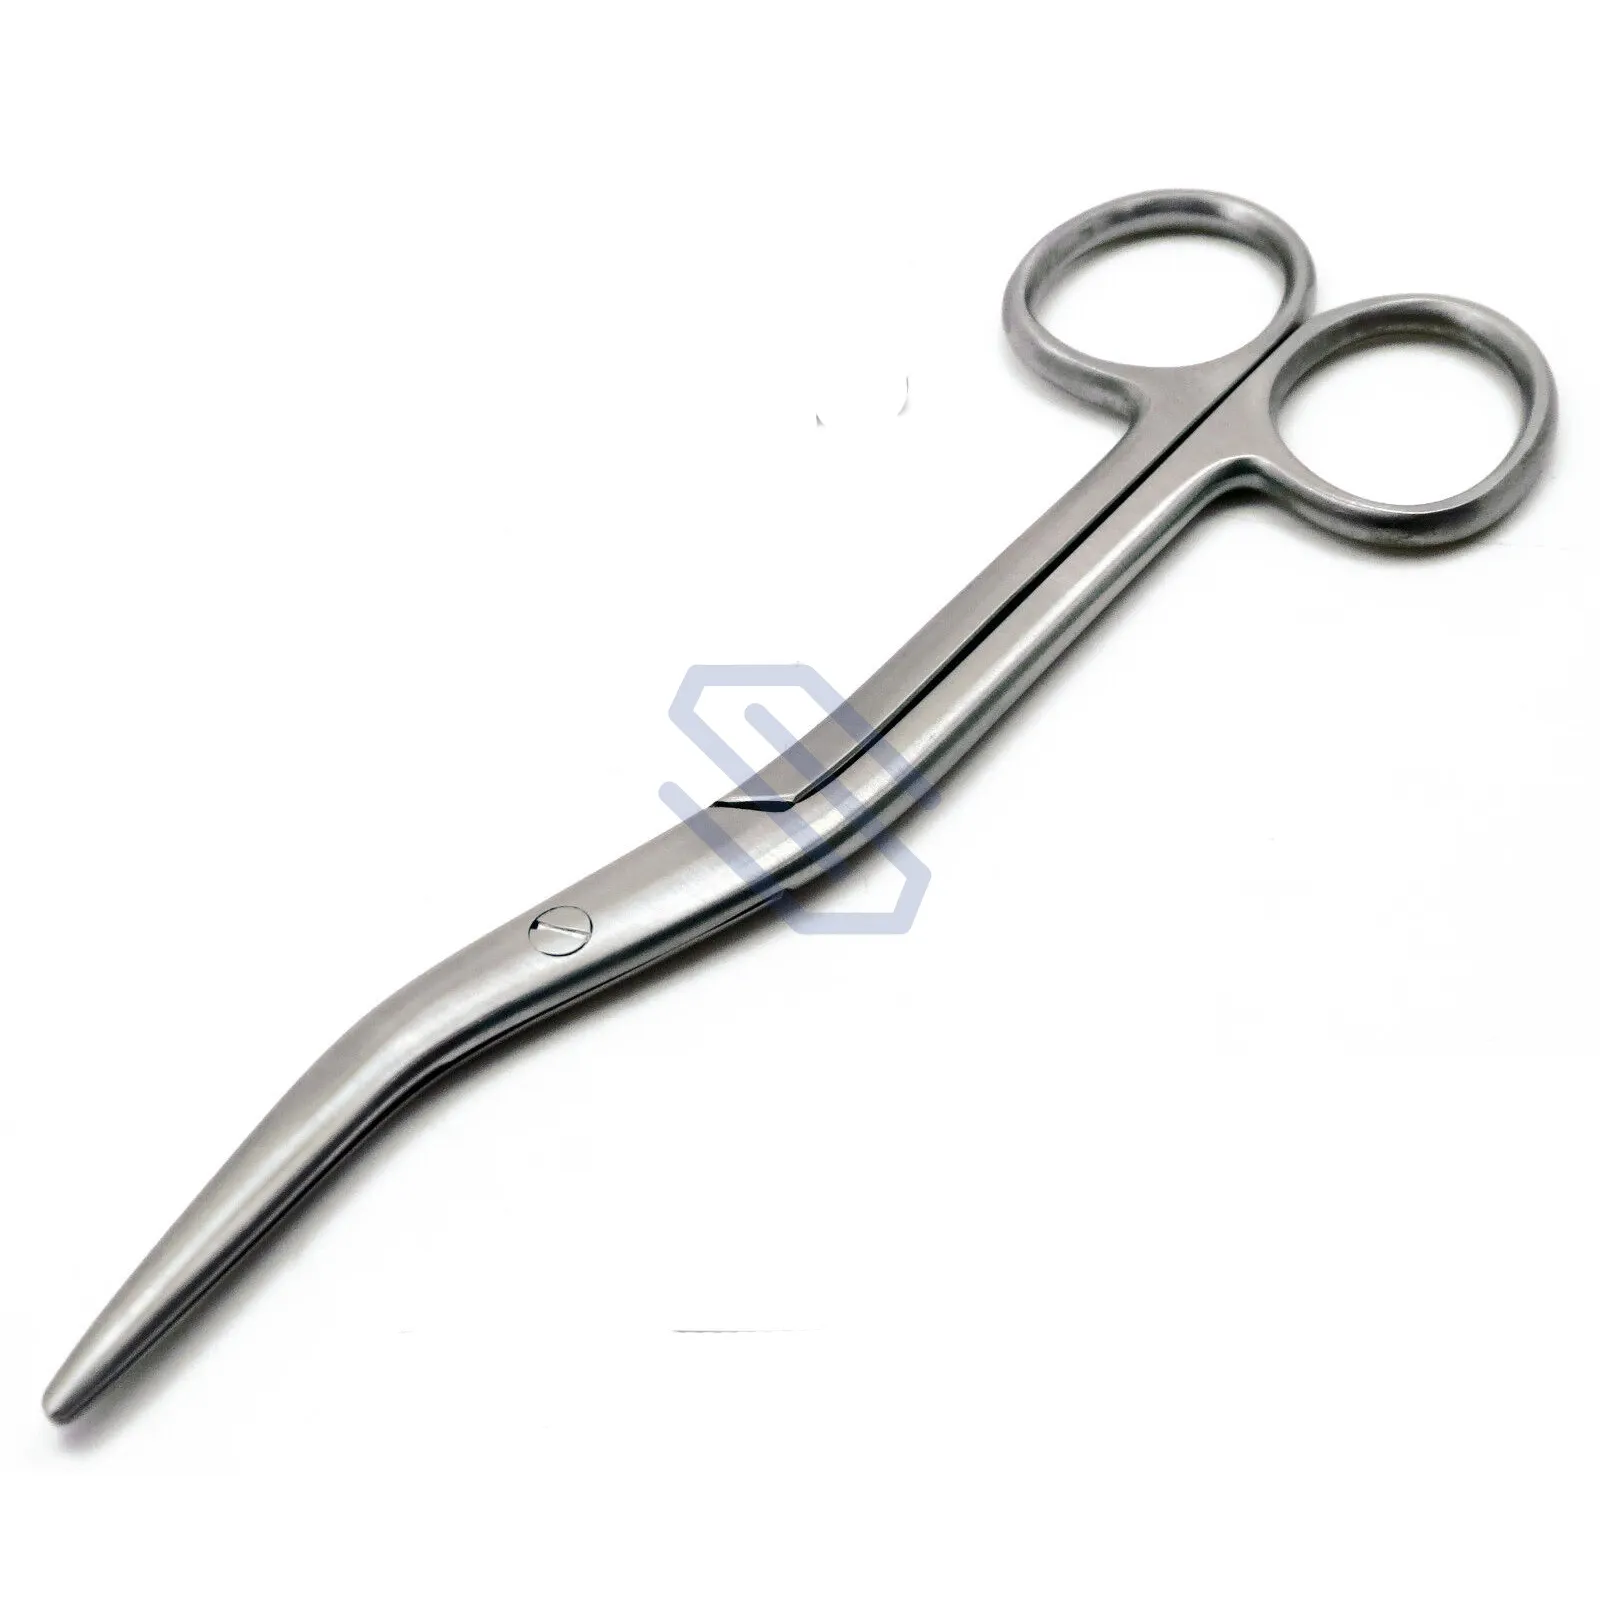 Surgical Curved Scissors 6" Side Angled Blunt/Blunt Universal Pro Surgical Instruments Stainless Steel